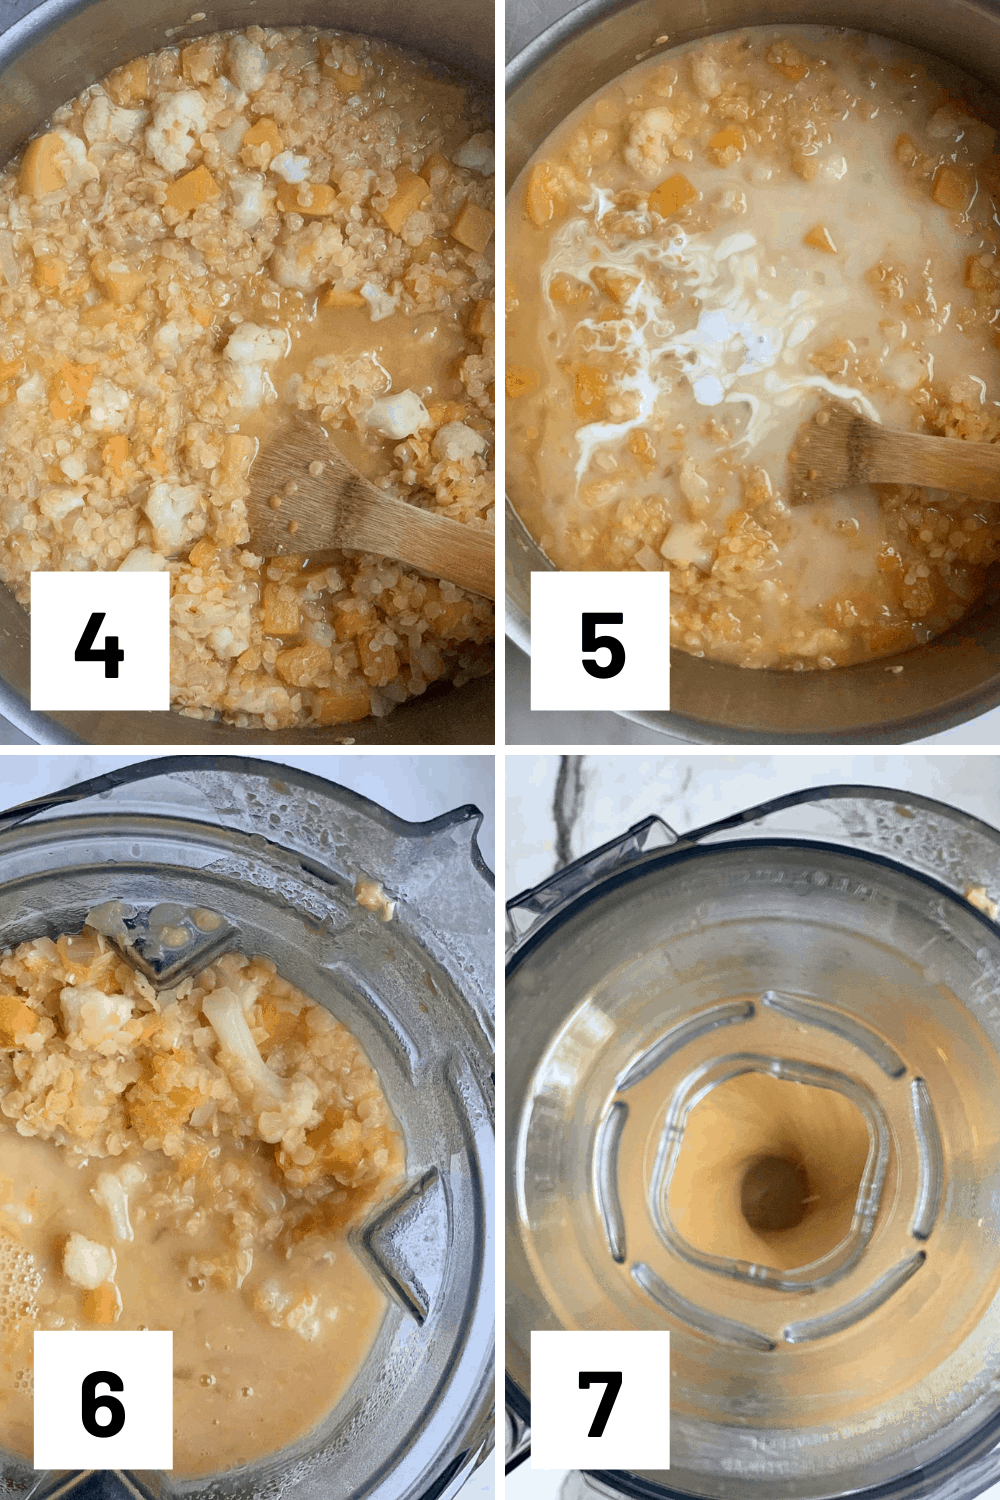 4 instructional photos of adding in broth to simmer, lemon juice and coconut milk, then blending in a blender until smooth.